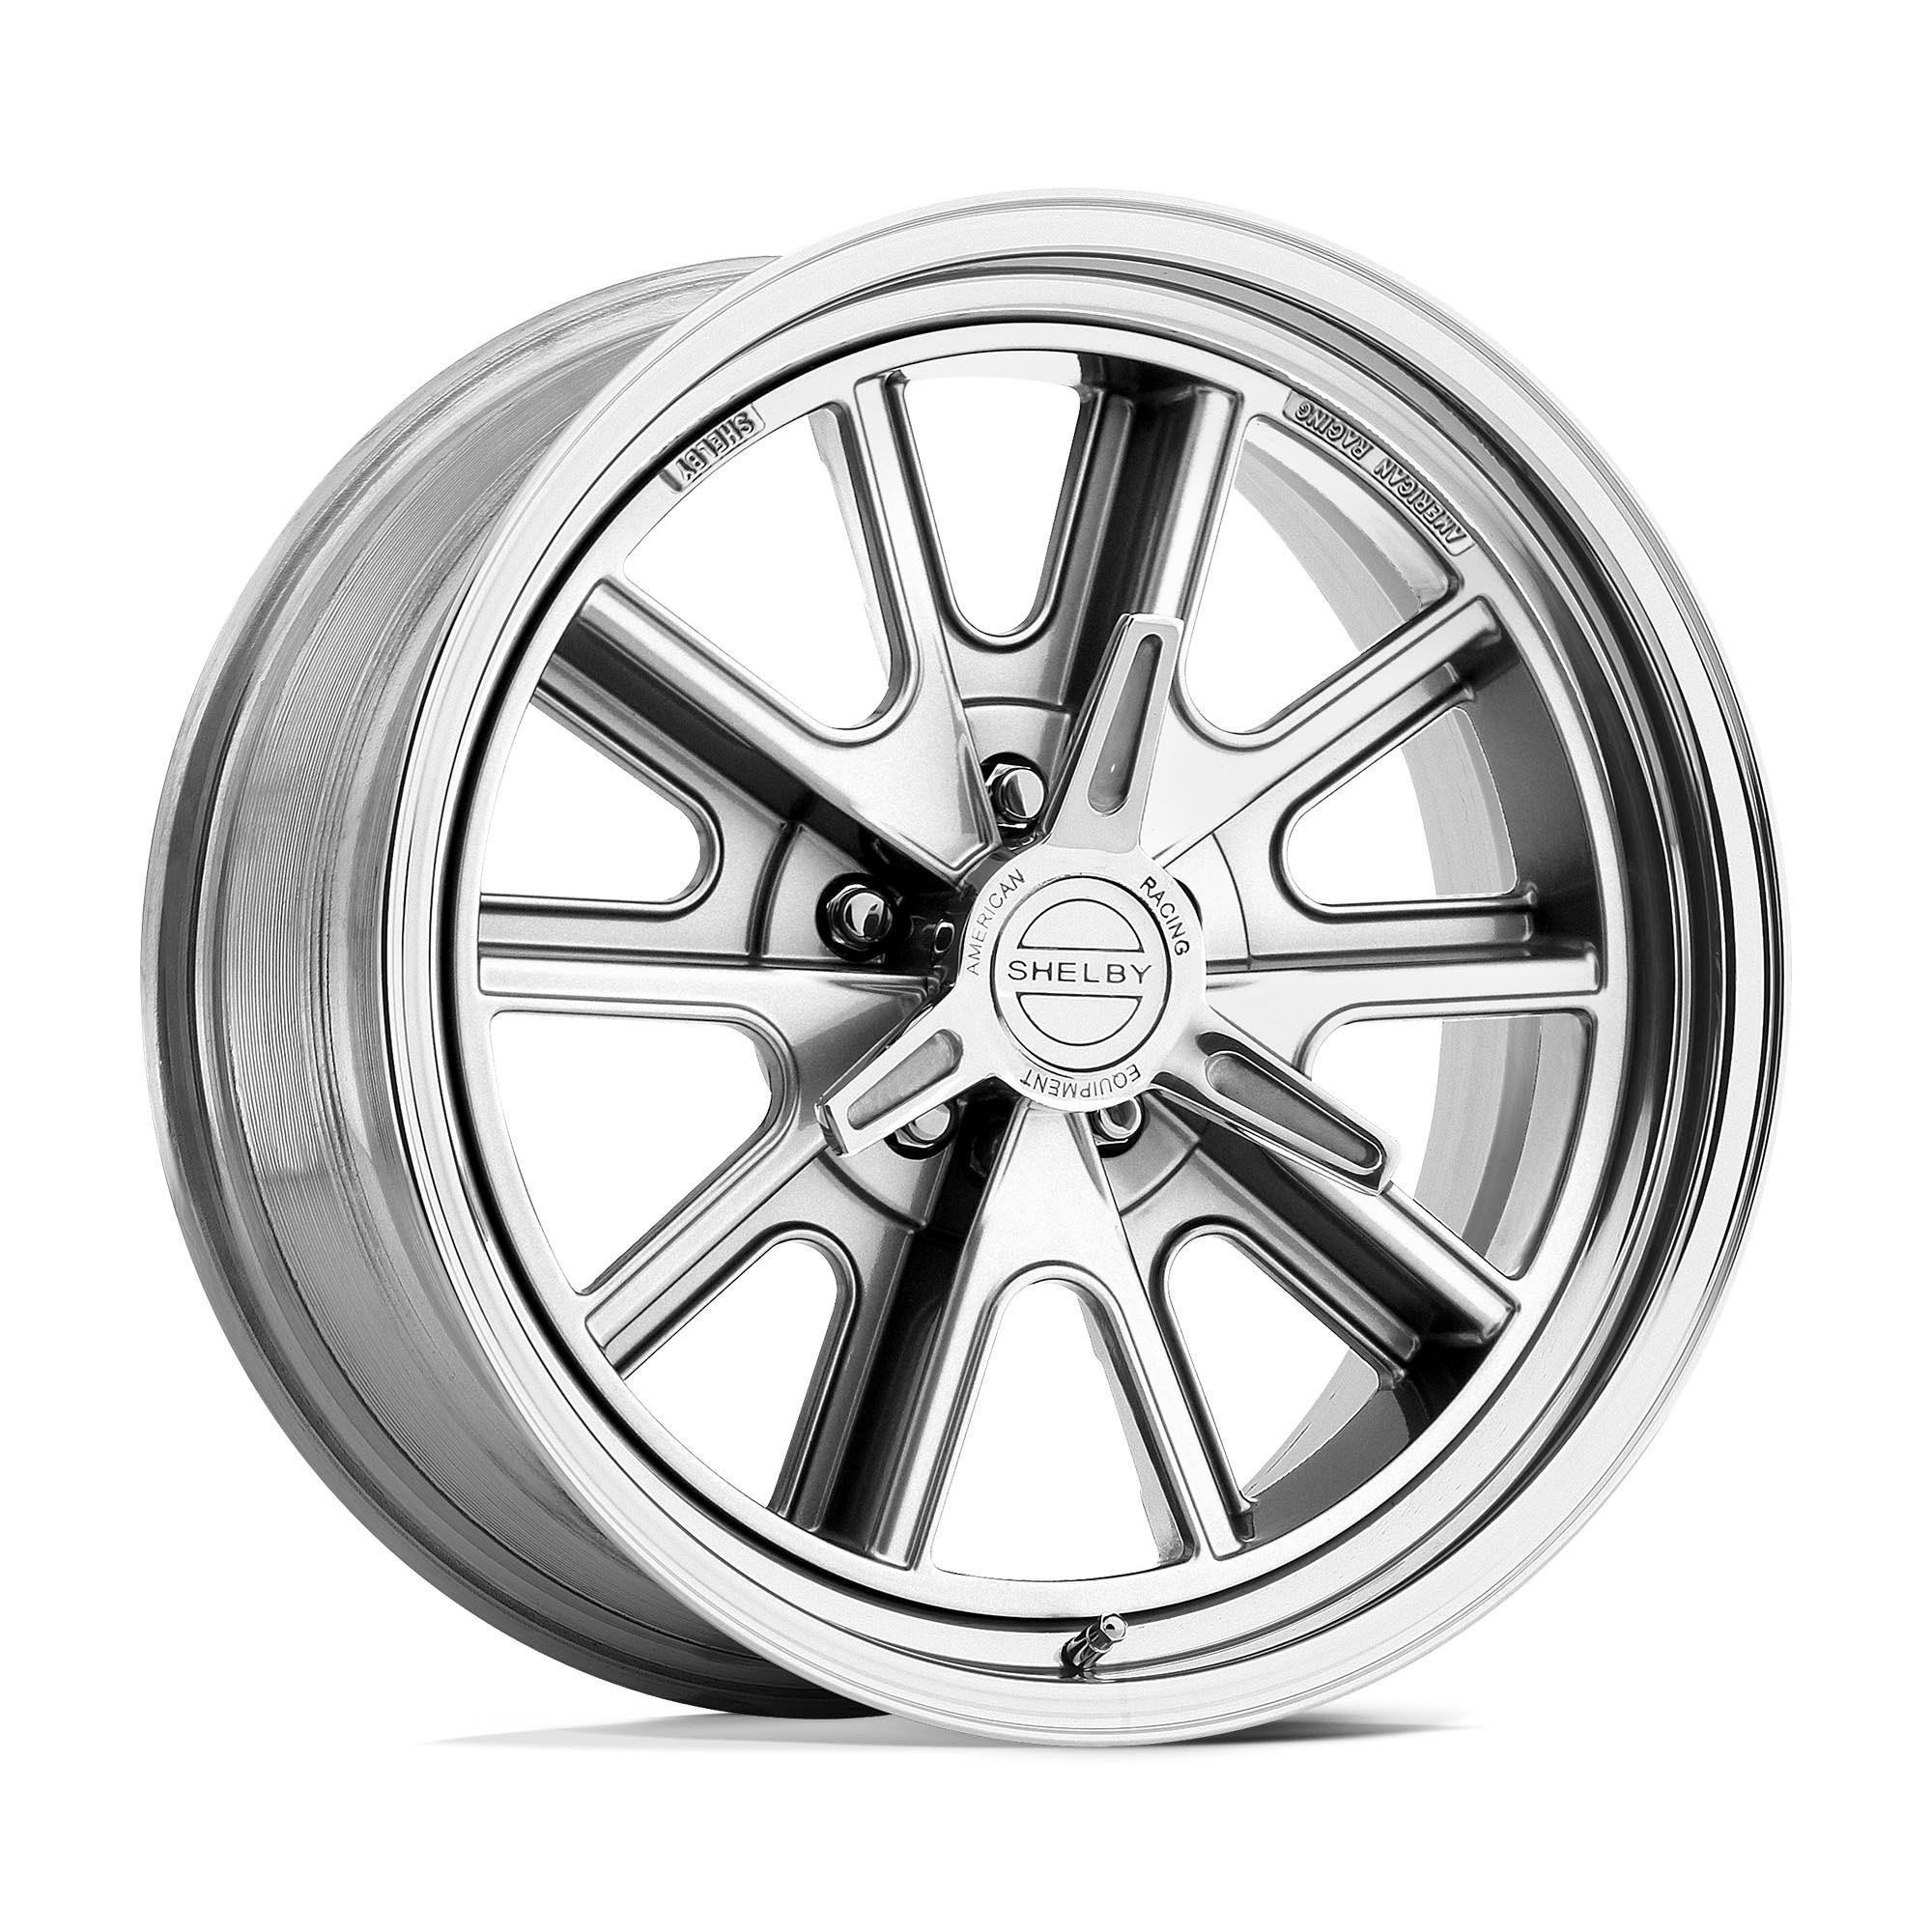 AMERICAN RACING VINTAGE VN427 SHELBY Polished 15 inch